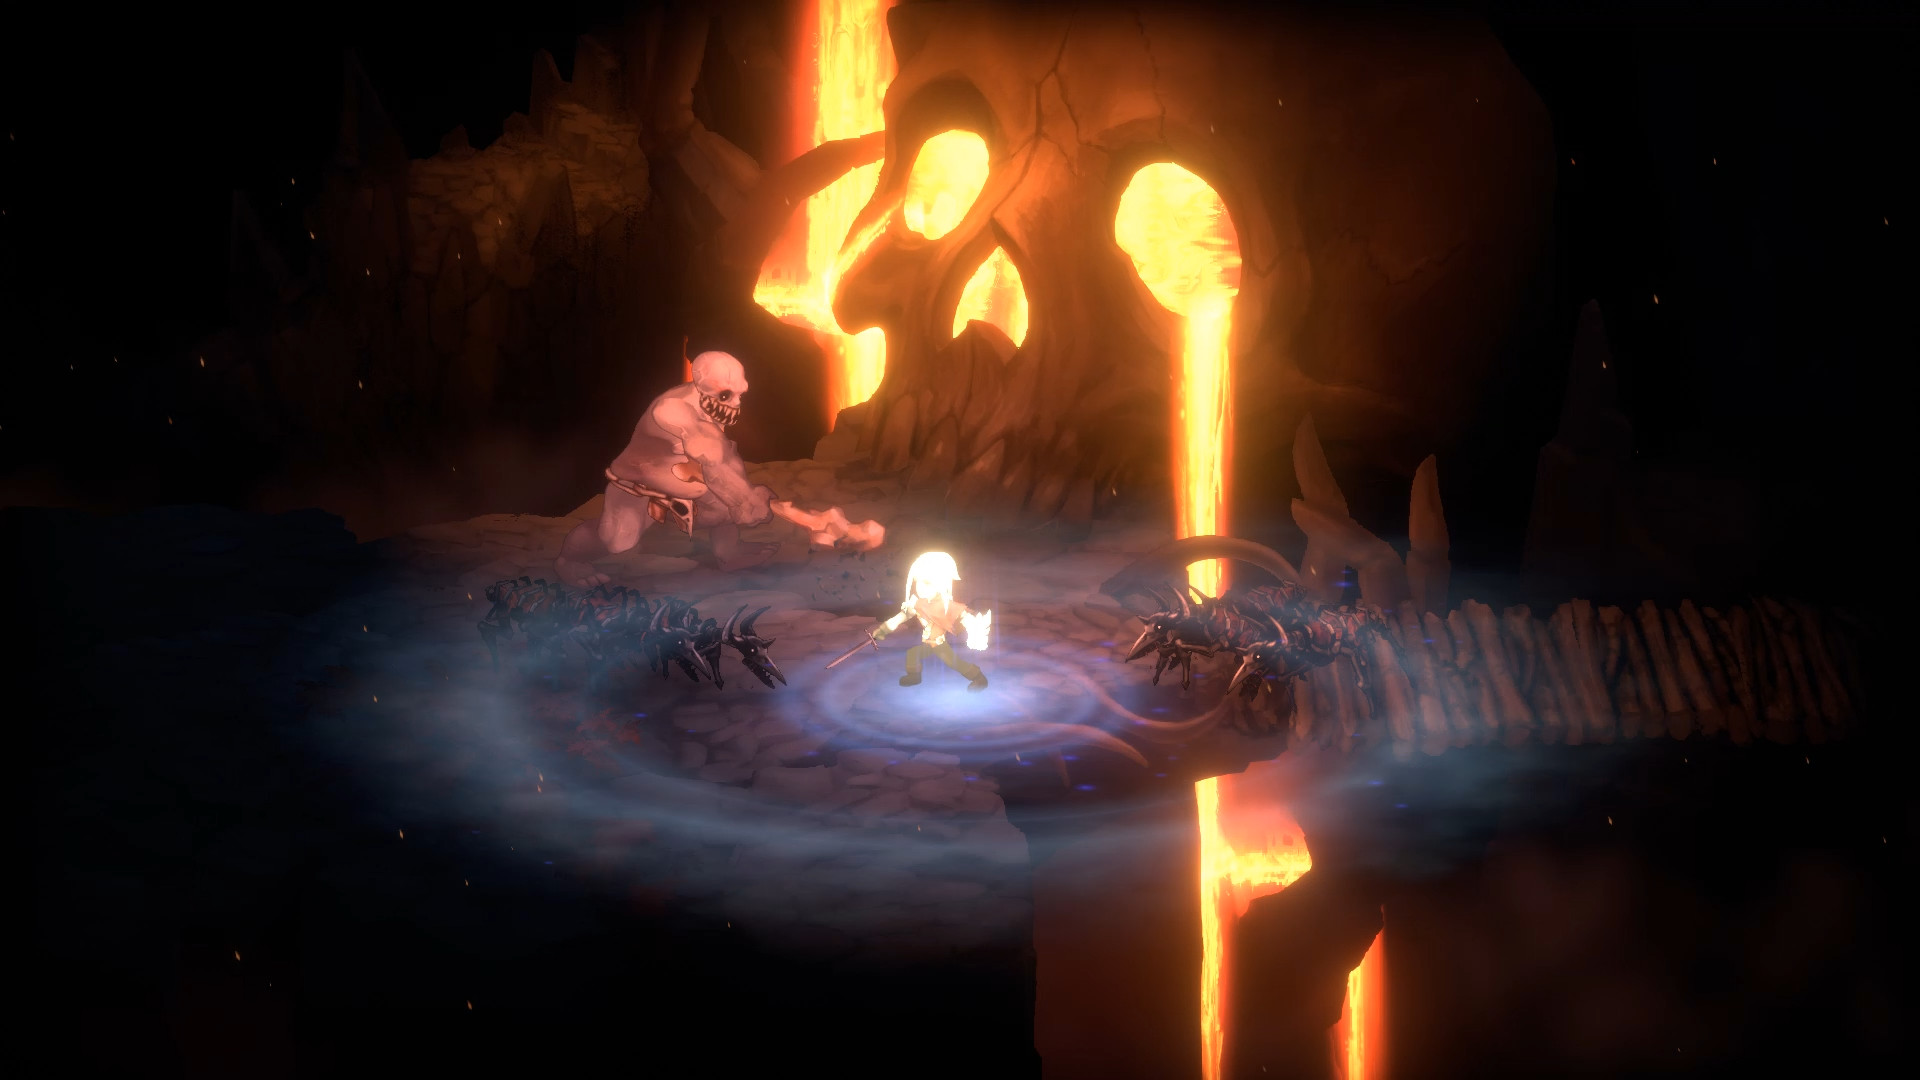 Screenshot From Darkest Valley Featuring A Skull With Lava